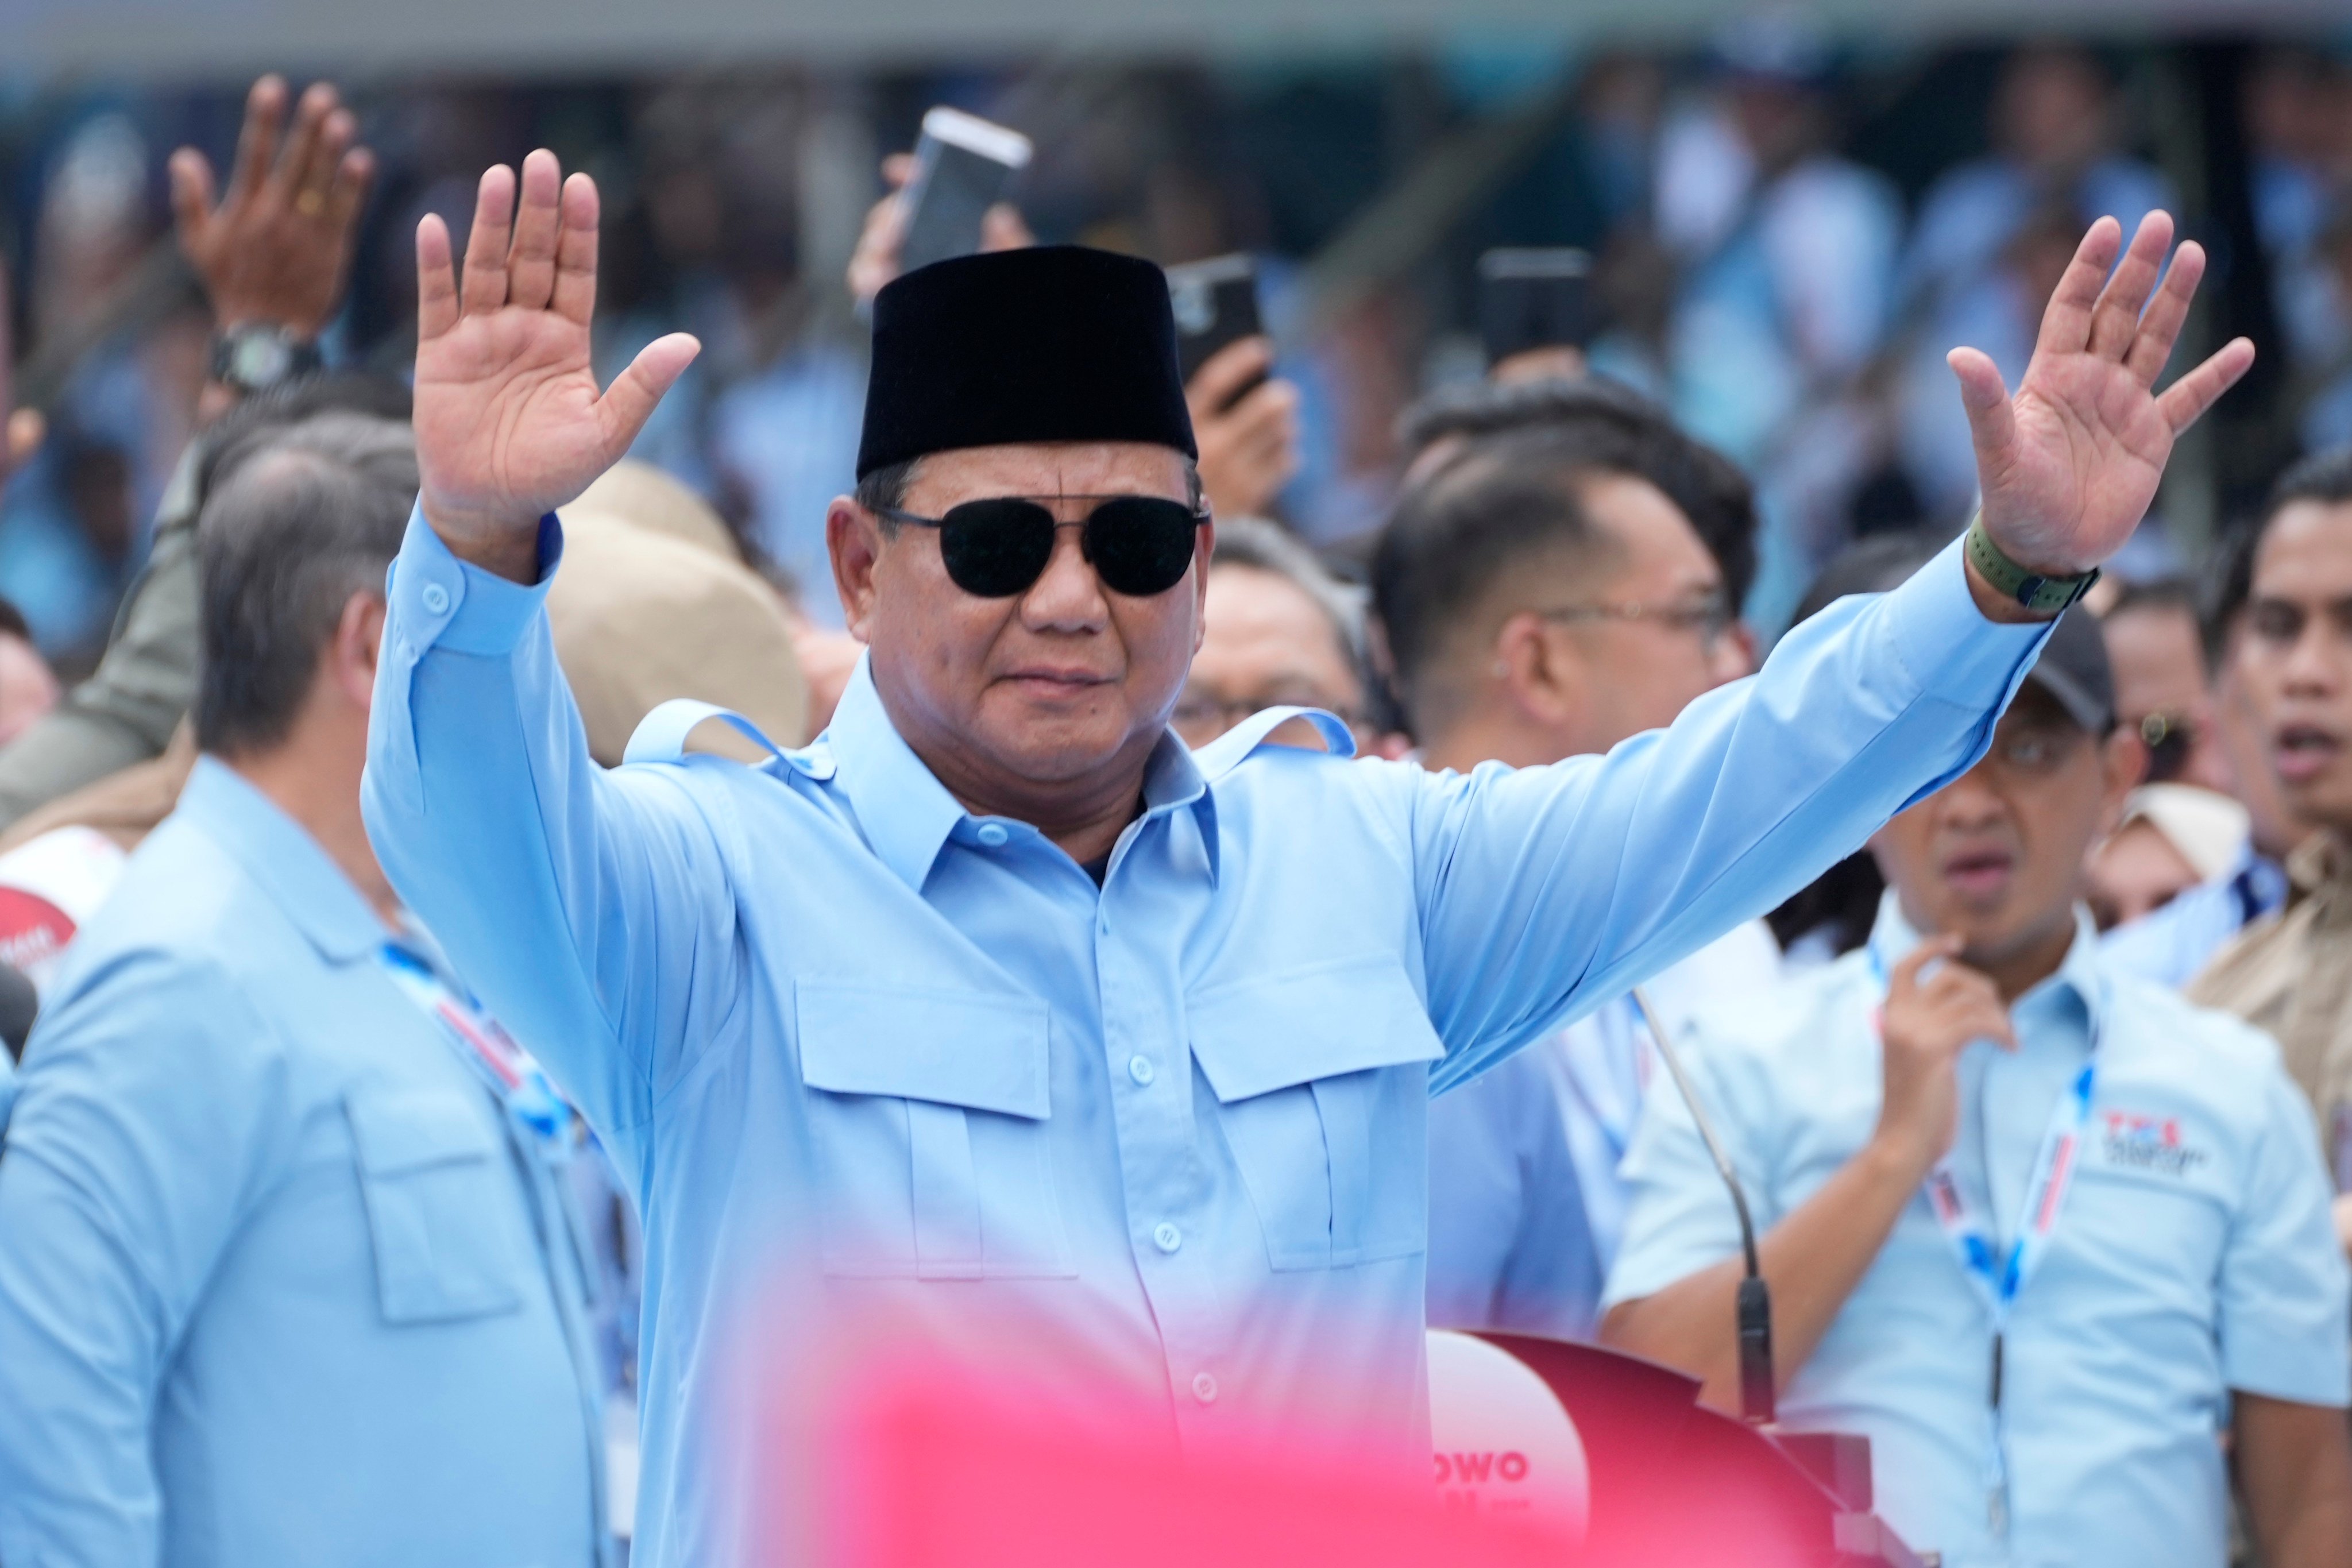 As the front-runner in the February 14 election, defence minister Prabowo Subianto has pledged to build on the business-friendly policies of President Joko Widodo. Photo: AP